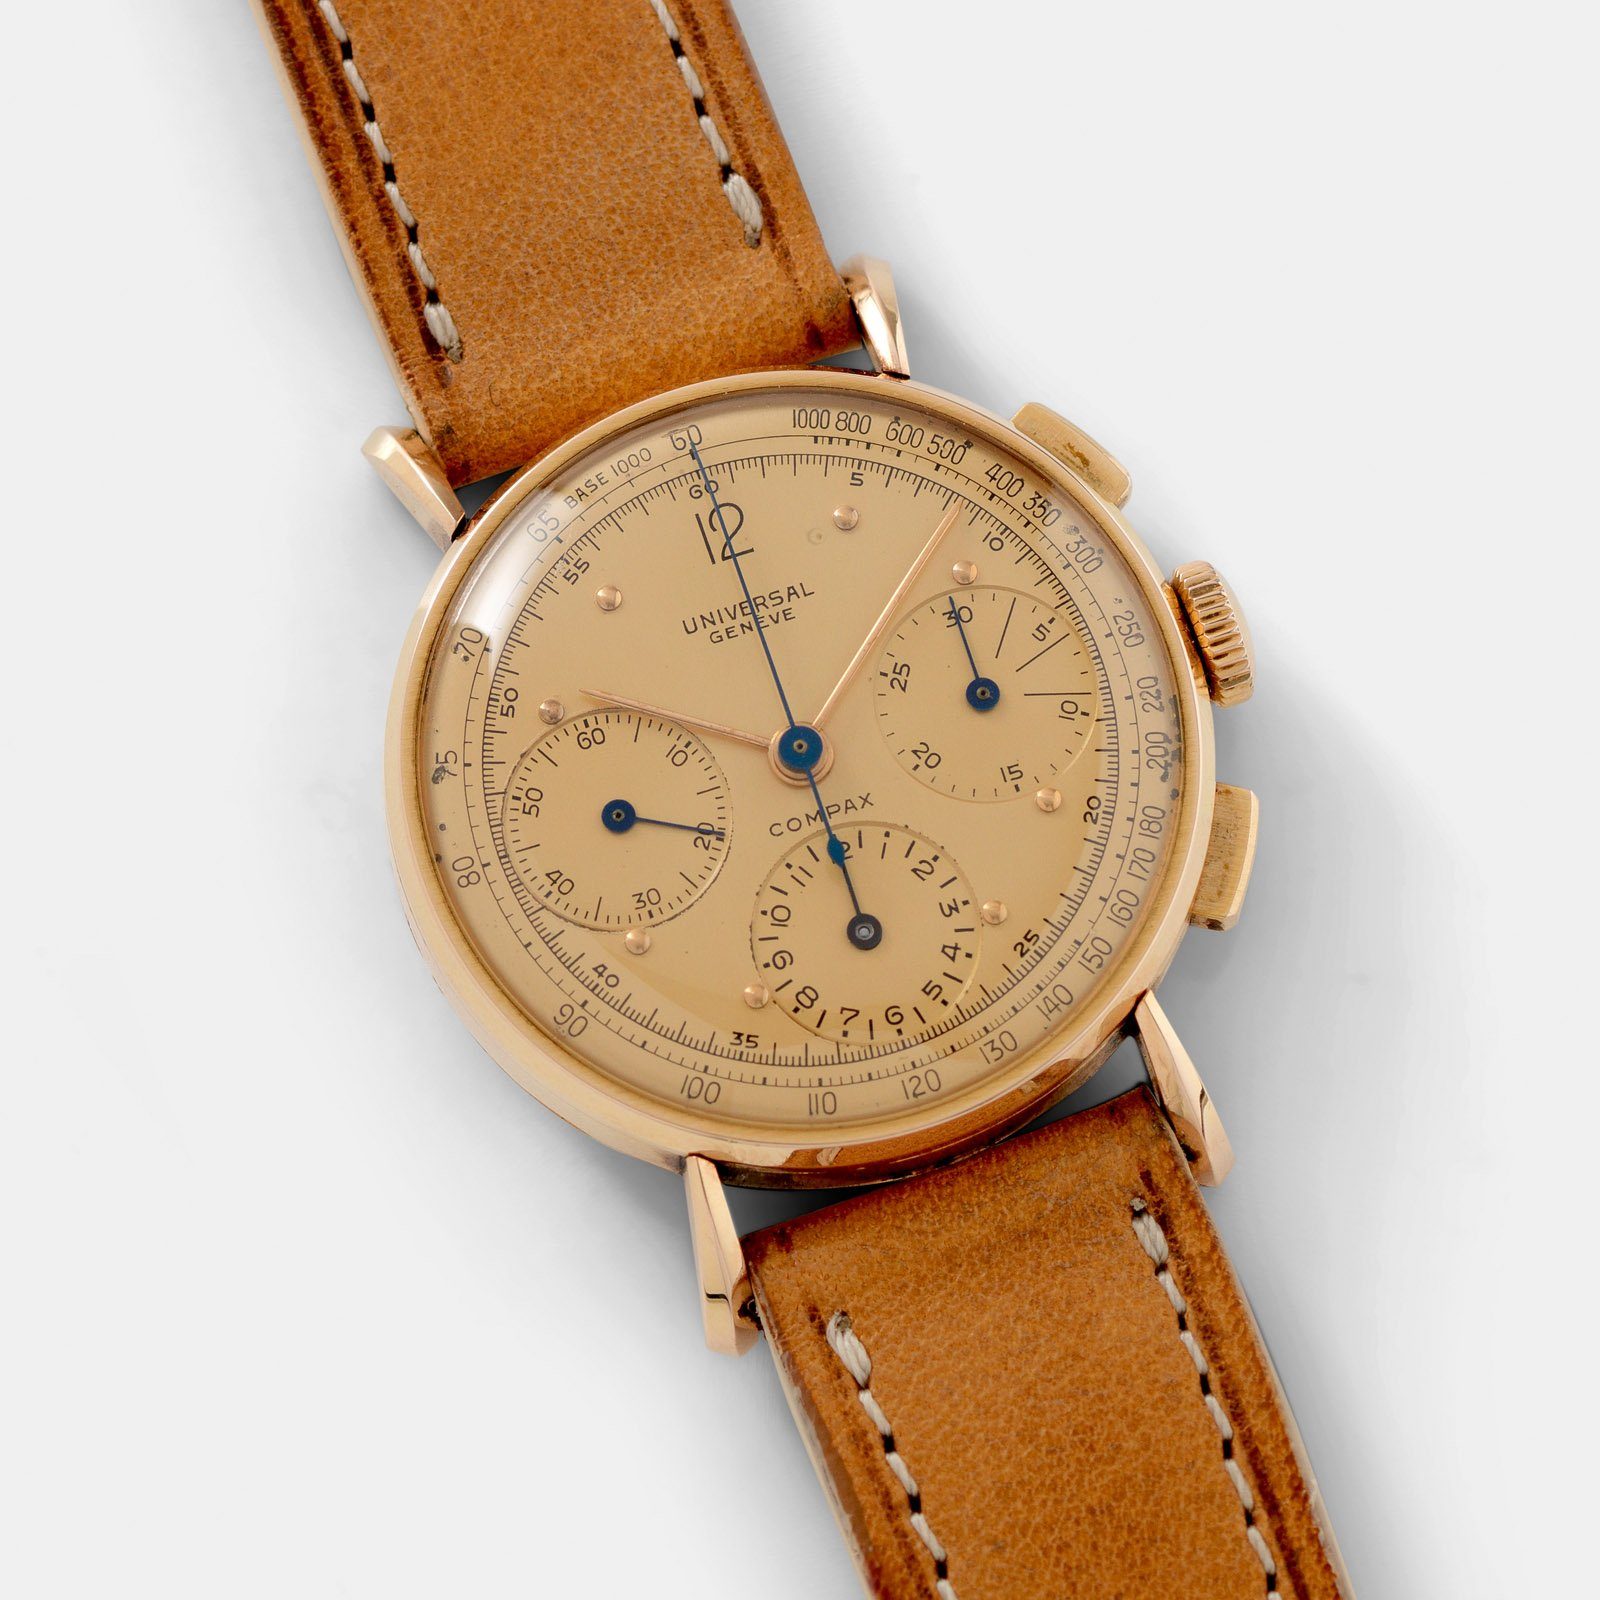 Universal Geneve - Tri-Compax Original 1947 Ref. 52216 Claw-Lugs 14kt. Gold  Chronograph - Cal. 481 - Lorologiese Fine Watches